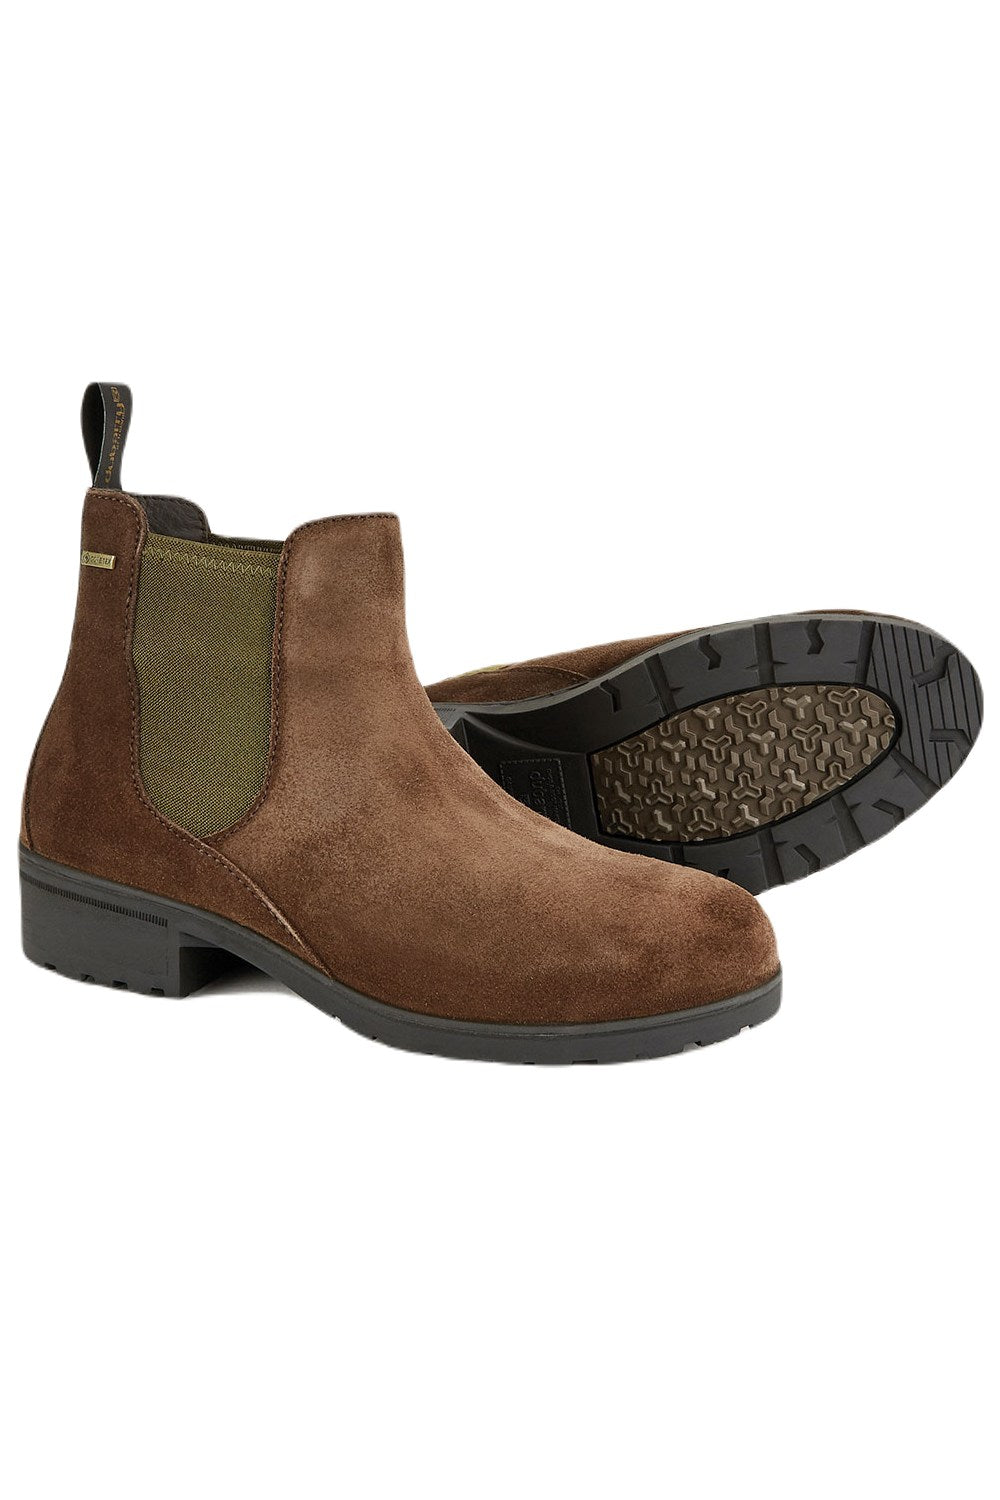 Dubarry Womens Waterford Chelsea Boots in Cigar 